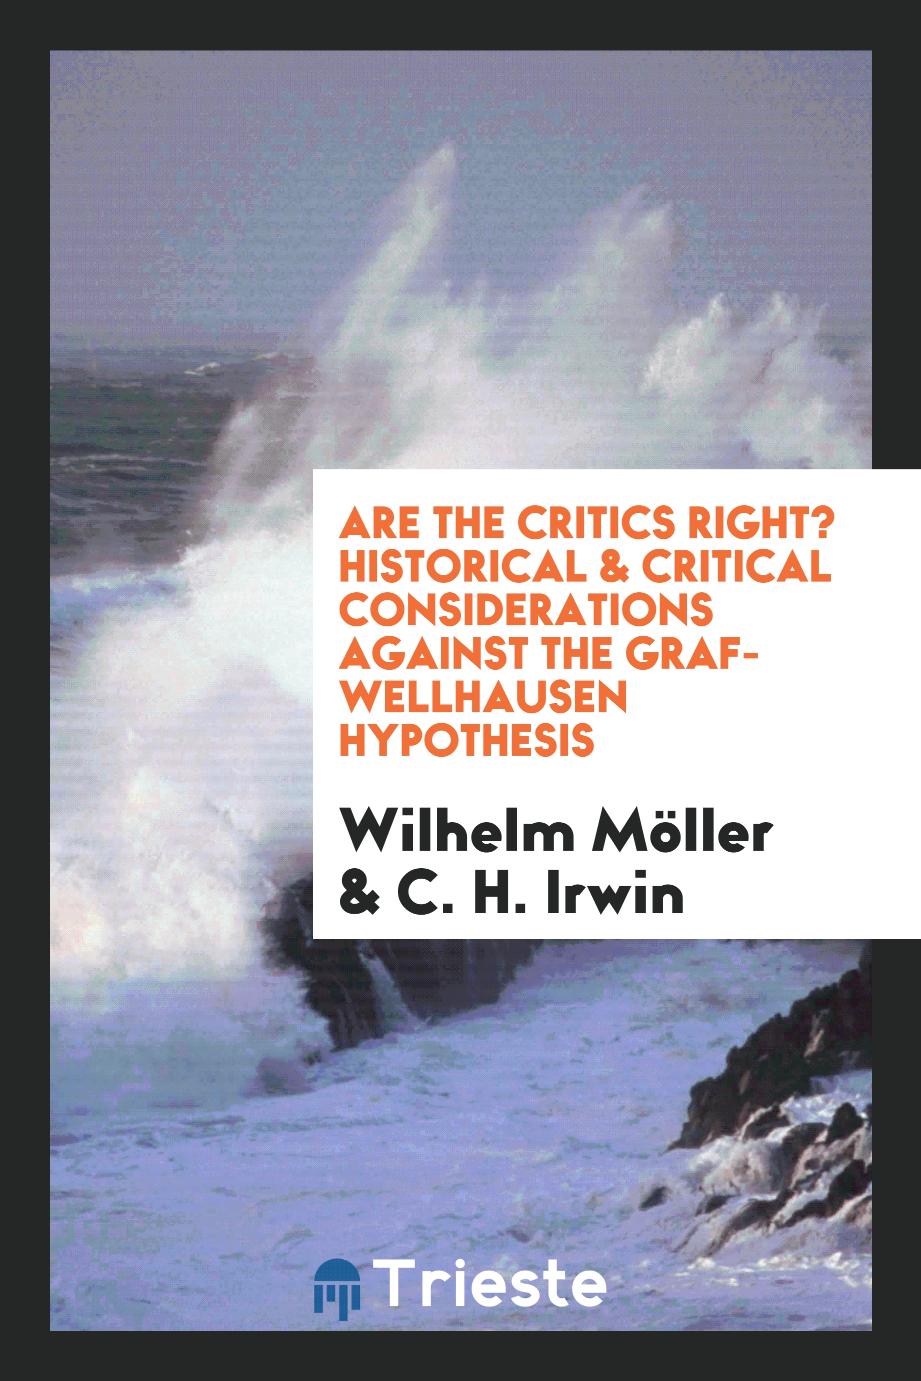 Are the critics right? Historical & critical considerations against the Graf-Wellhausen hypothesis